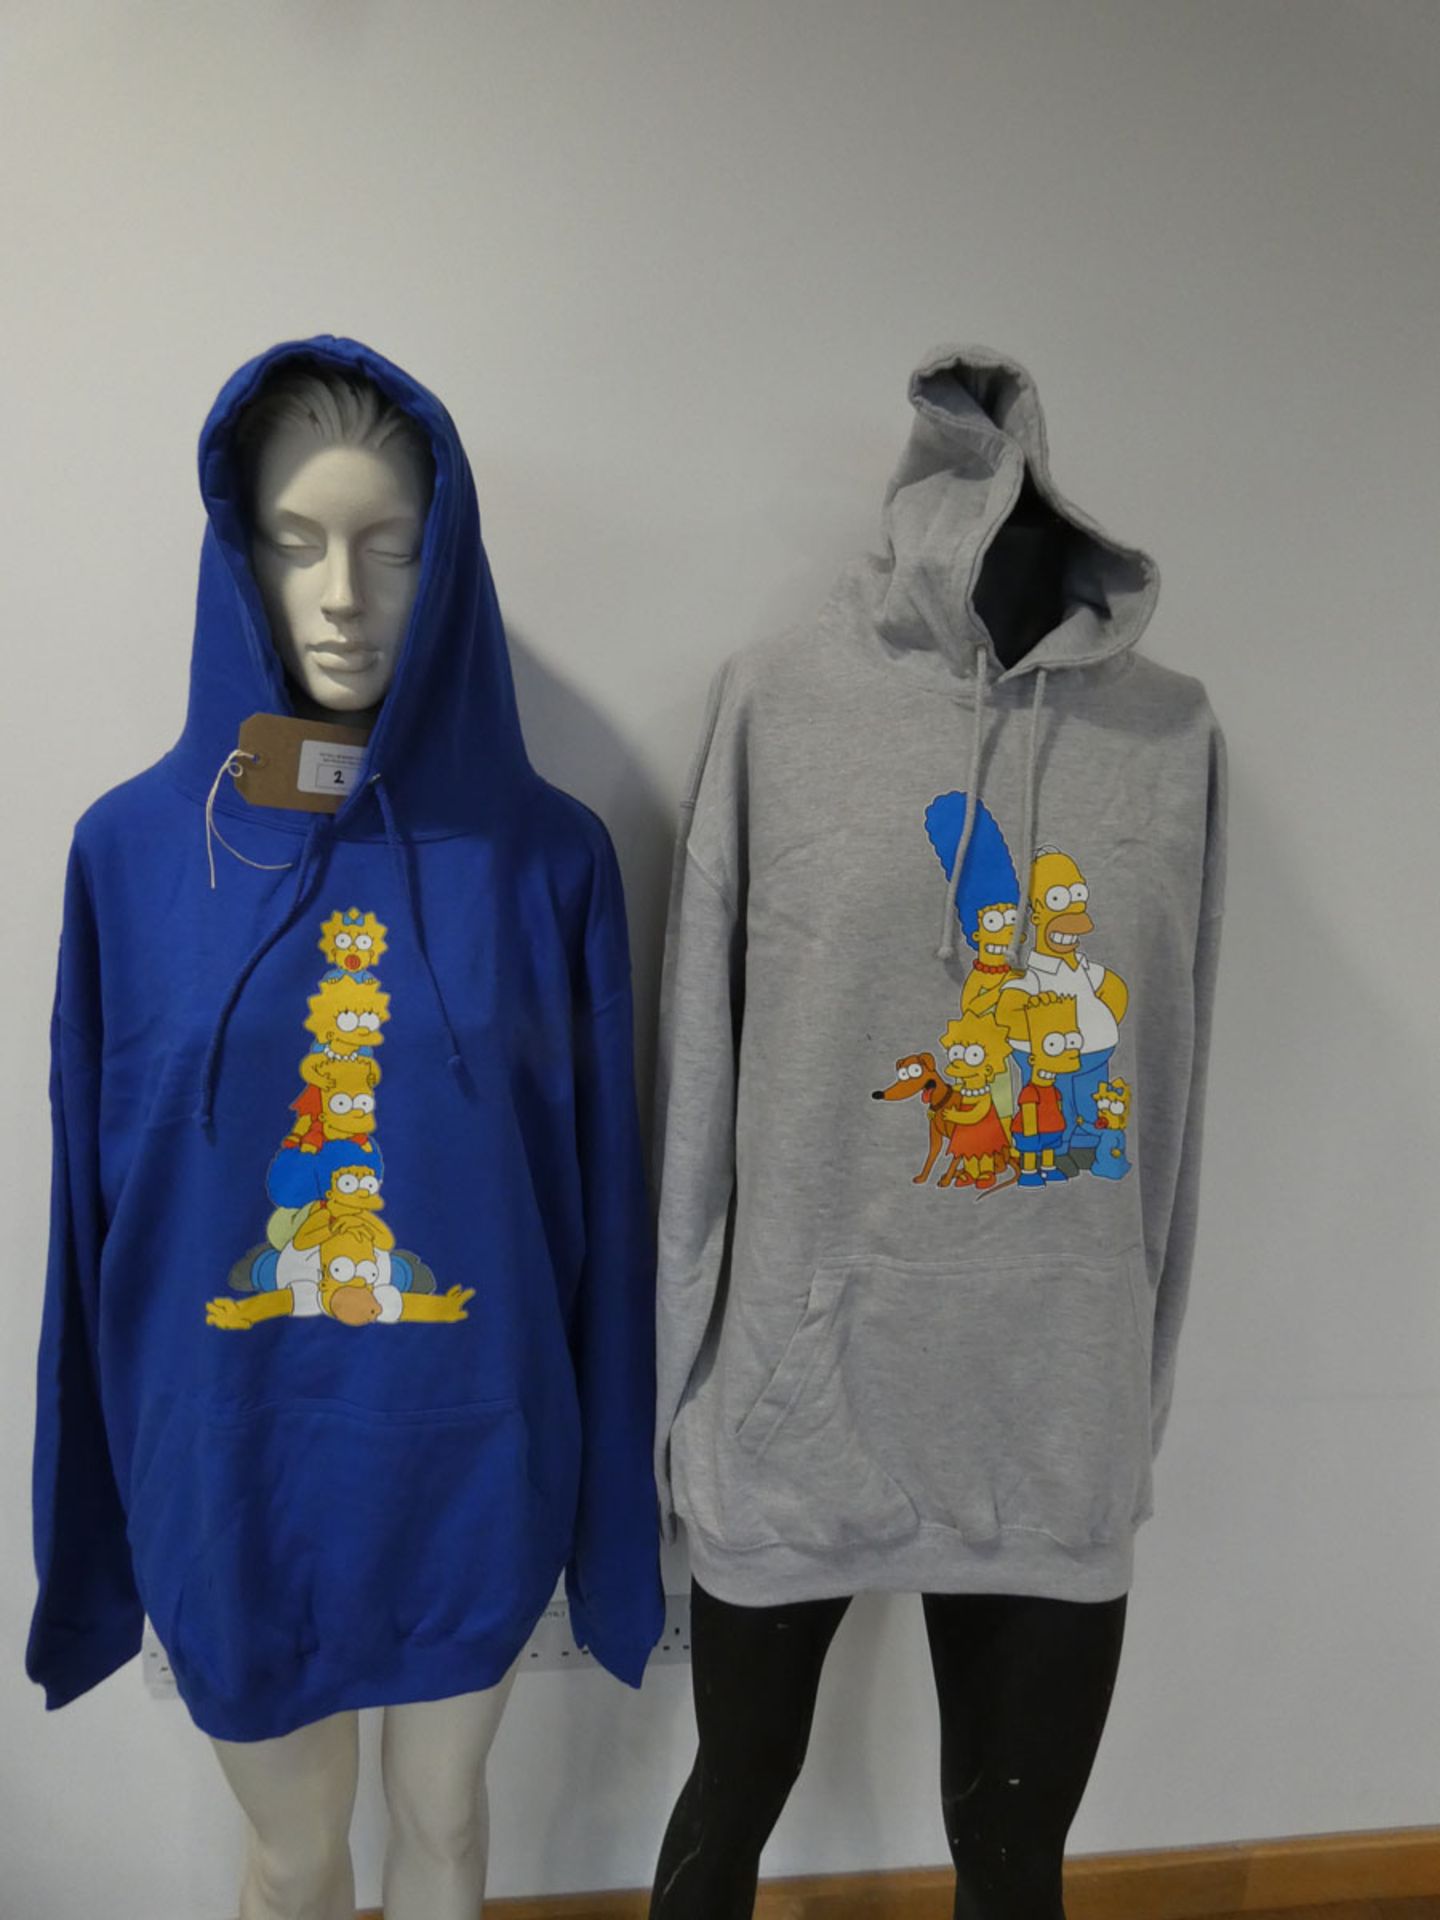 The Simpsons Brandalliance hoodies in grey and blue both size XL